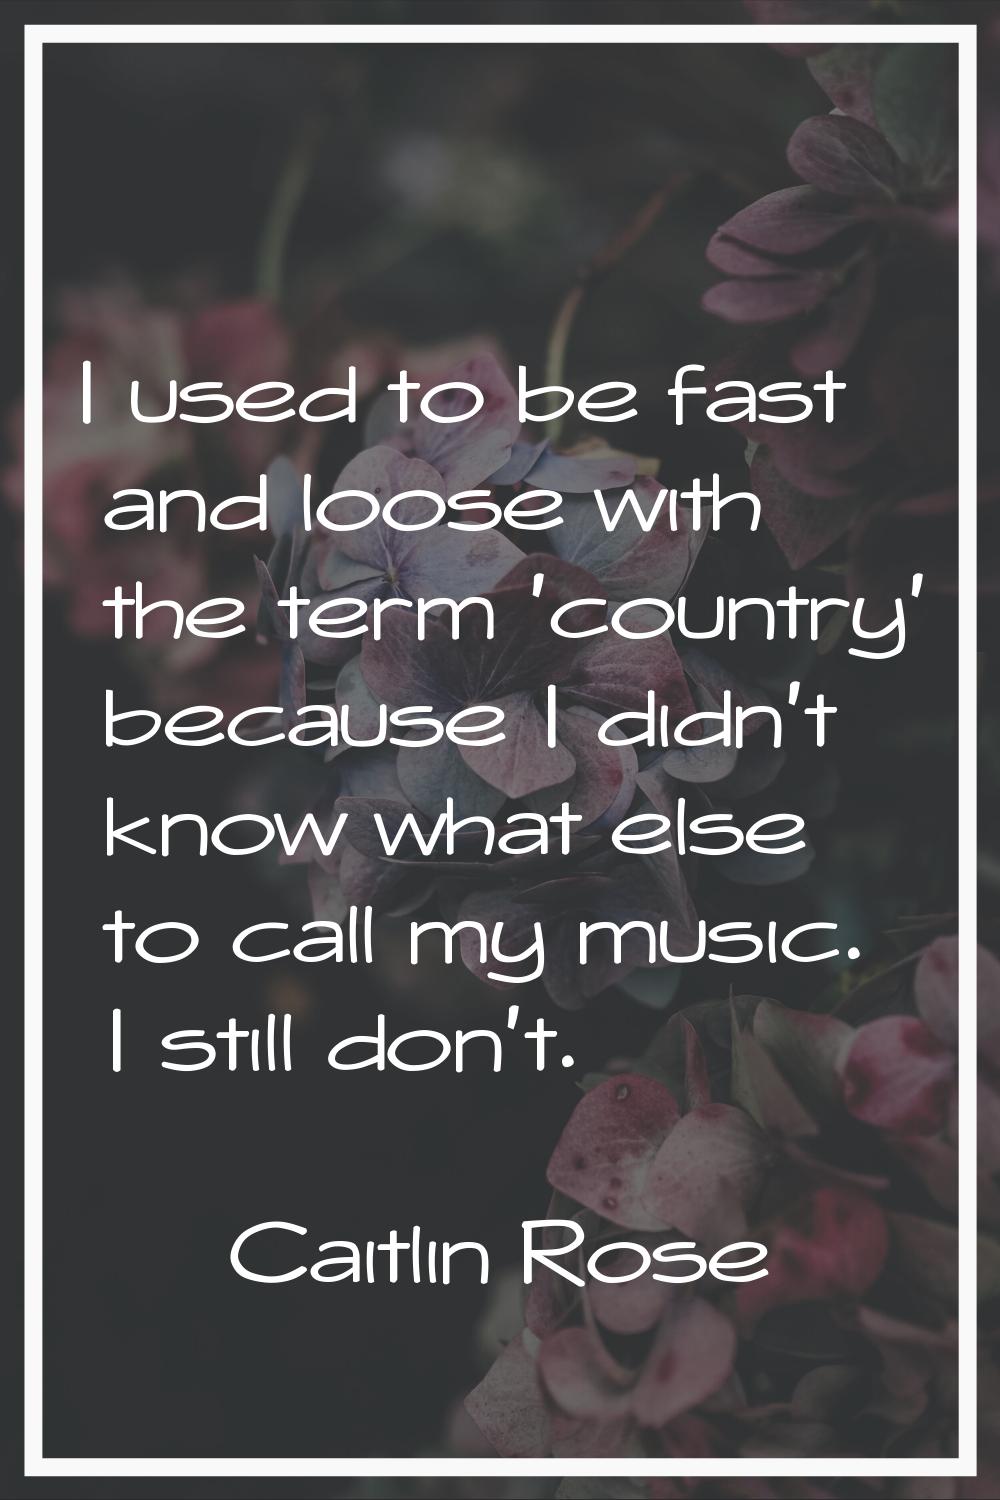 I used to be fast and loose with the term 'country' because I didn't know what else to call my musi